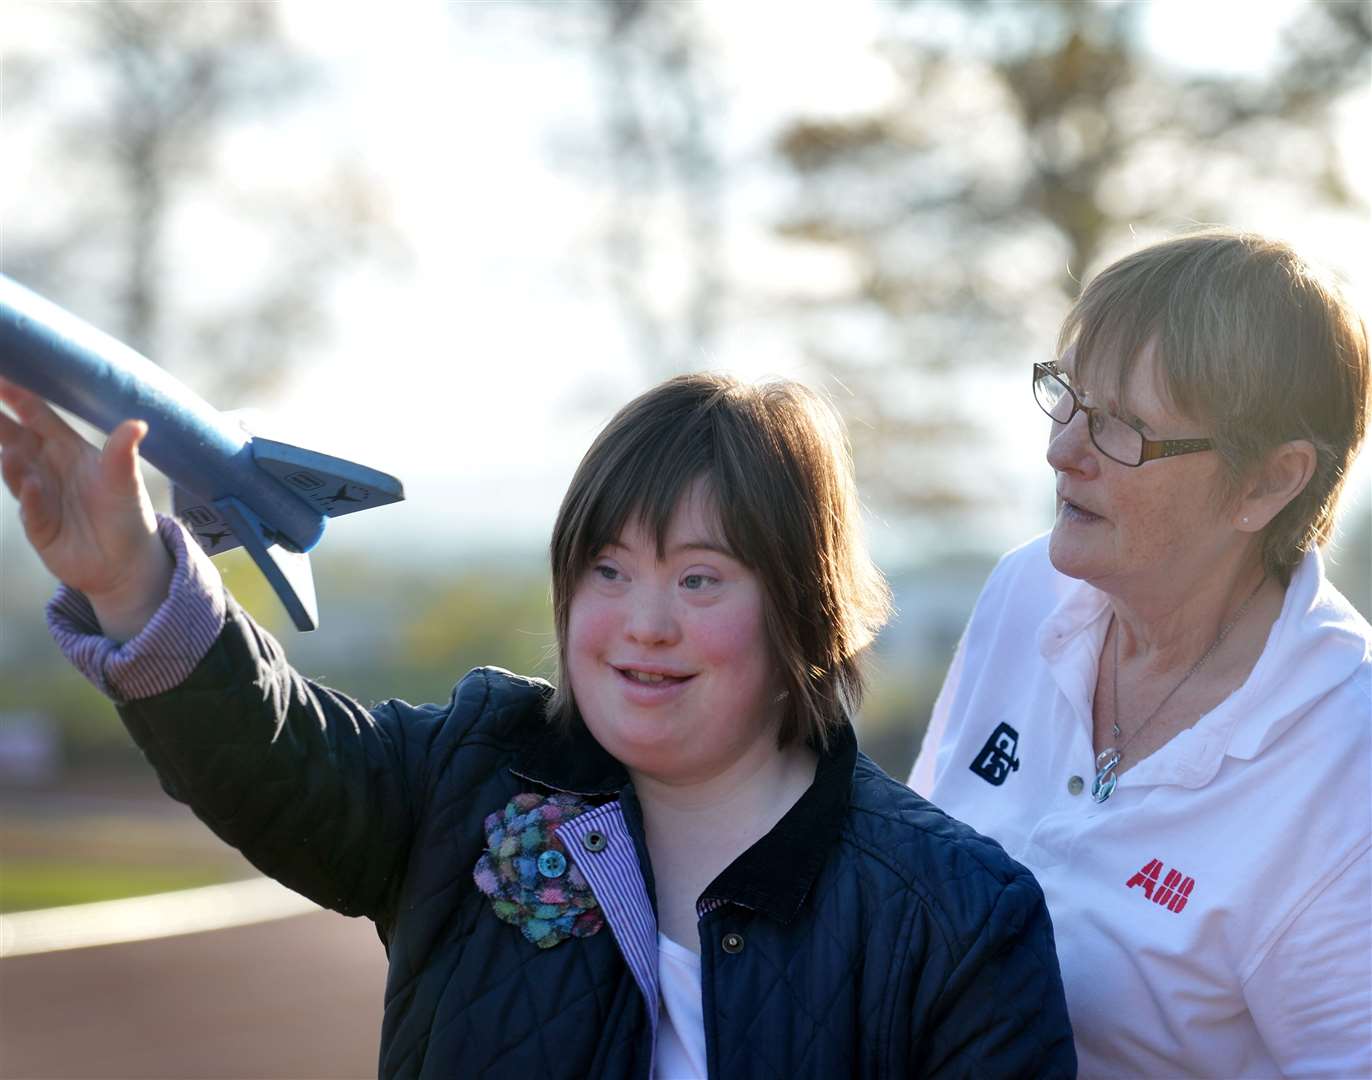 Shona Ann Macleod taking part in javelin practice with Liz McLeod of Highland Disability Sport.